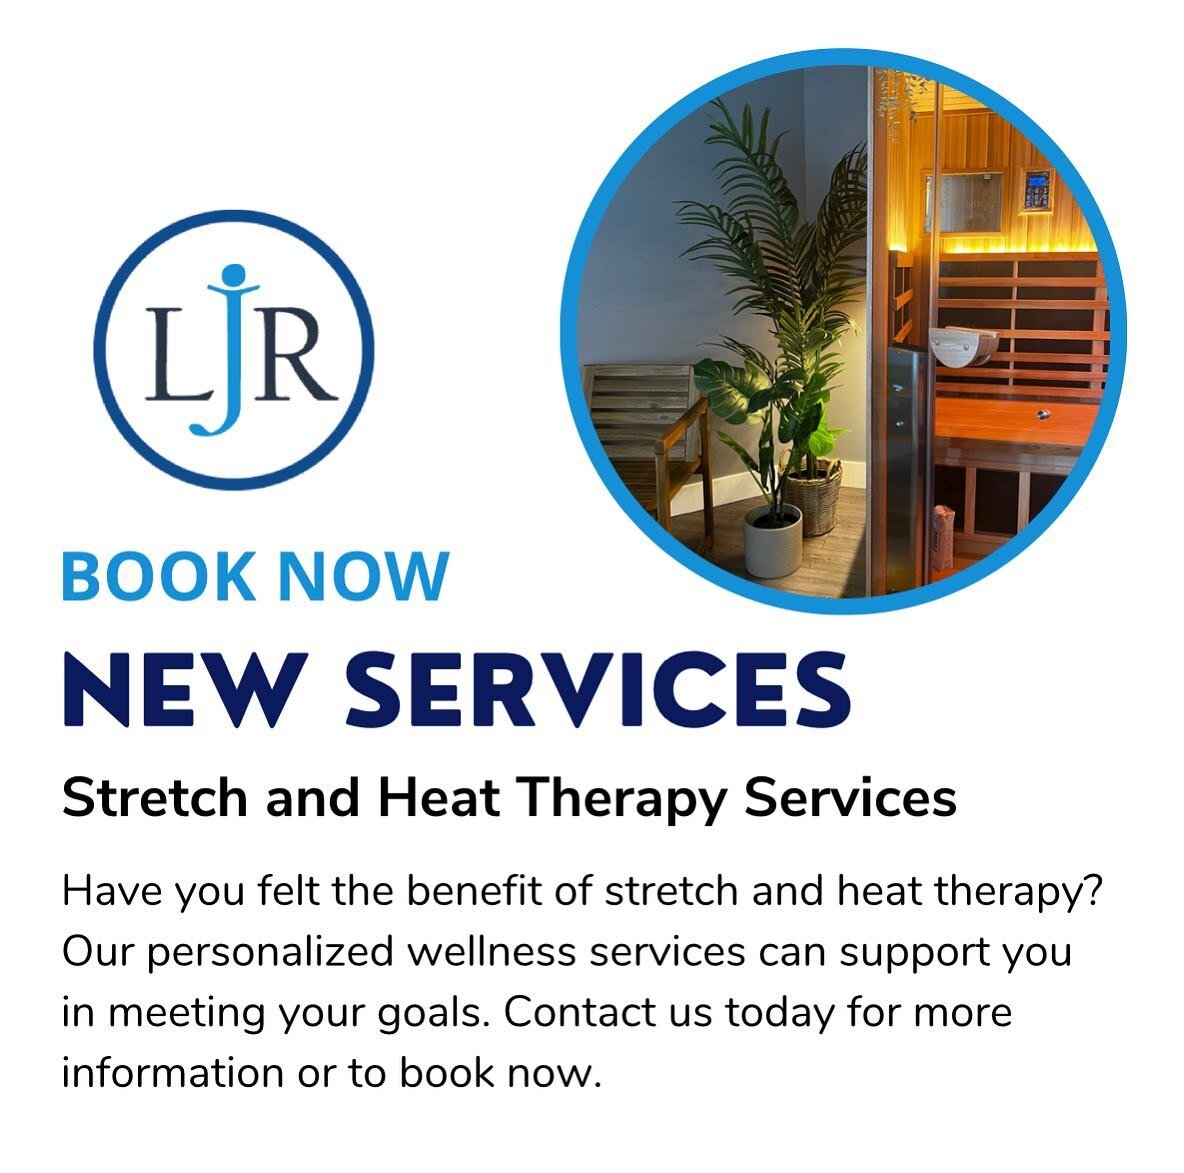 Are you interested in enhancing or adding your wellness routine? Want to experience the benefits of 1:1 stretching or infrared heat therapy? Well, we have an answer for you! 

We have launched two (2) new services 1:1 stretch therapy and heat therapy